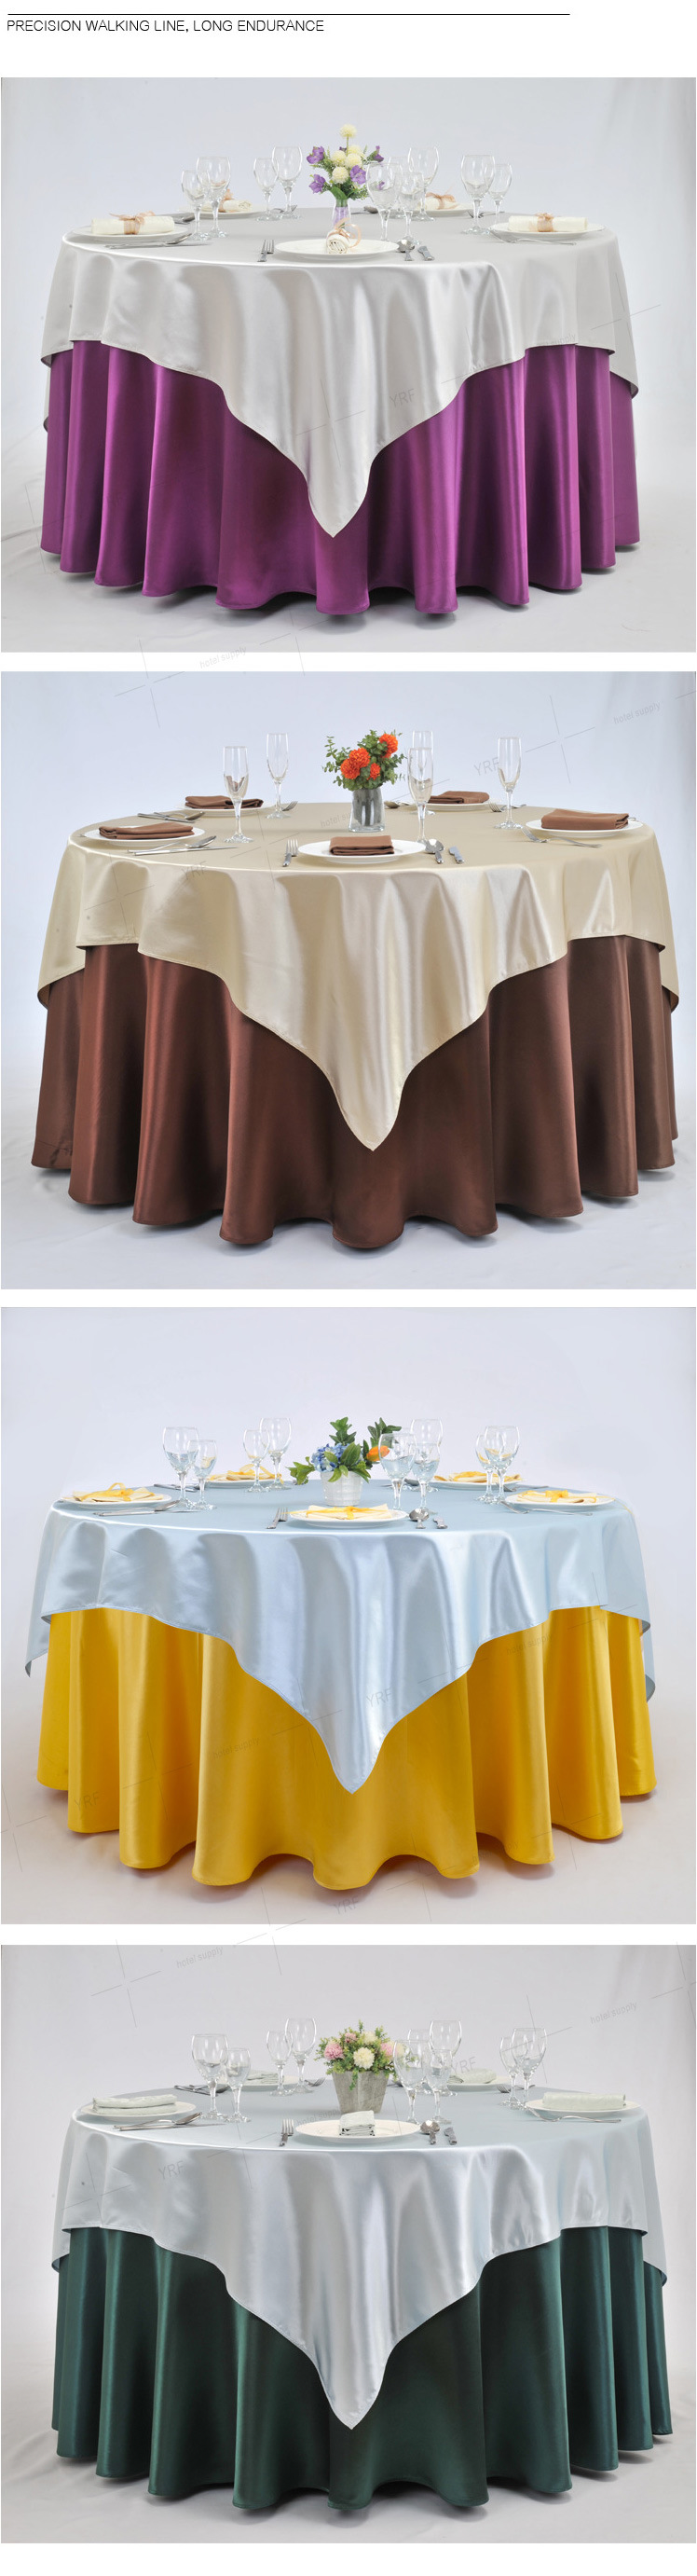 Banquet Wedding Party Popular Printed Round Table Cloths for Round Tables